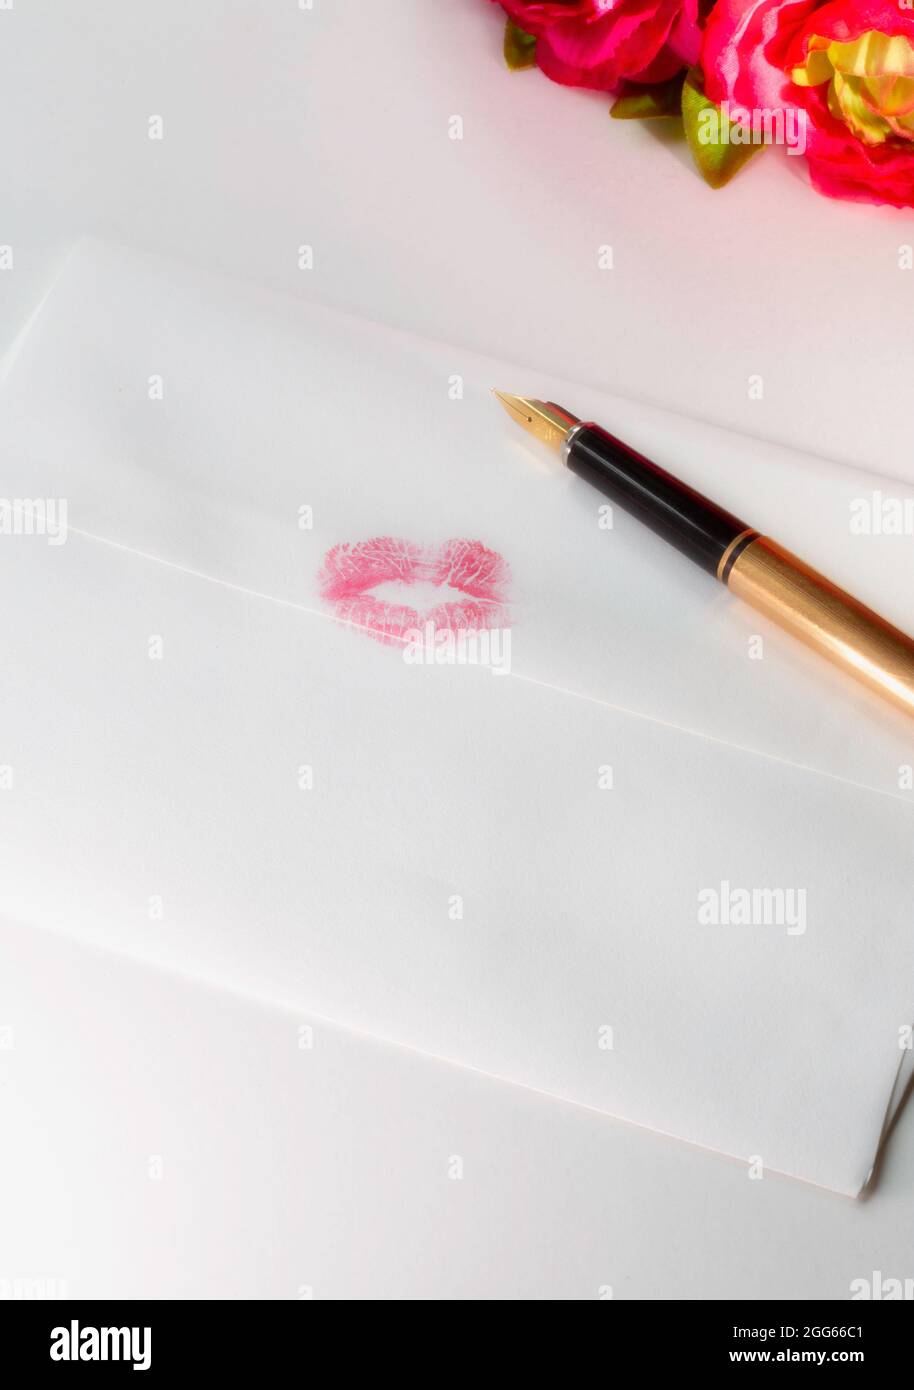 Love letter is sealed with a kiss. Stock Photo